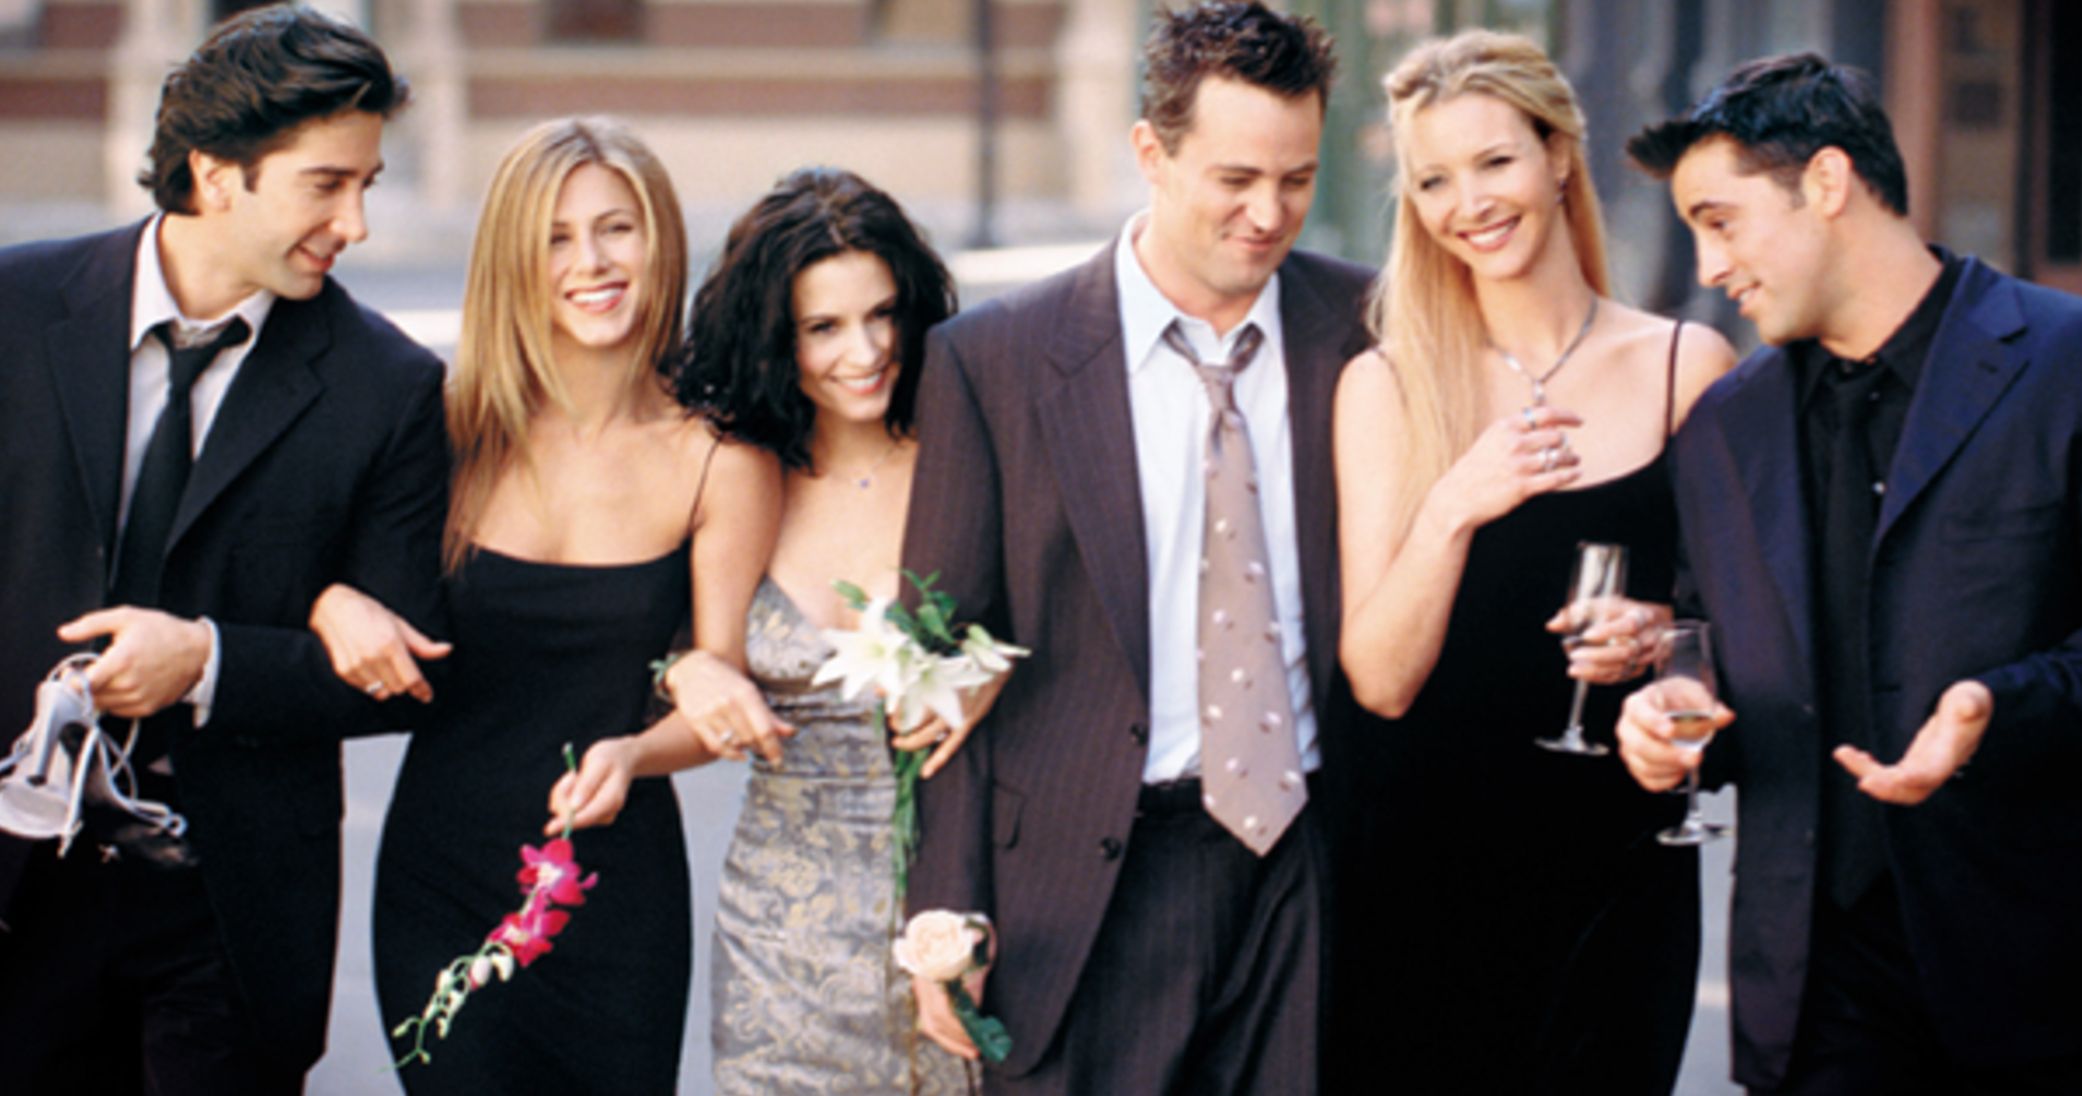 Friends Is Officially Leaving Netflix in 2020, Will Go Straight to HBO Max